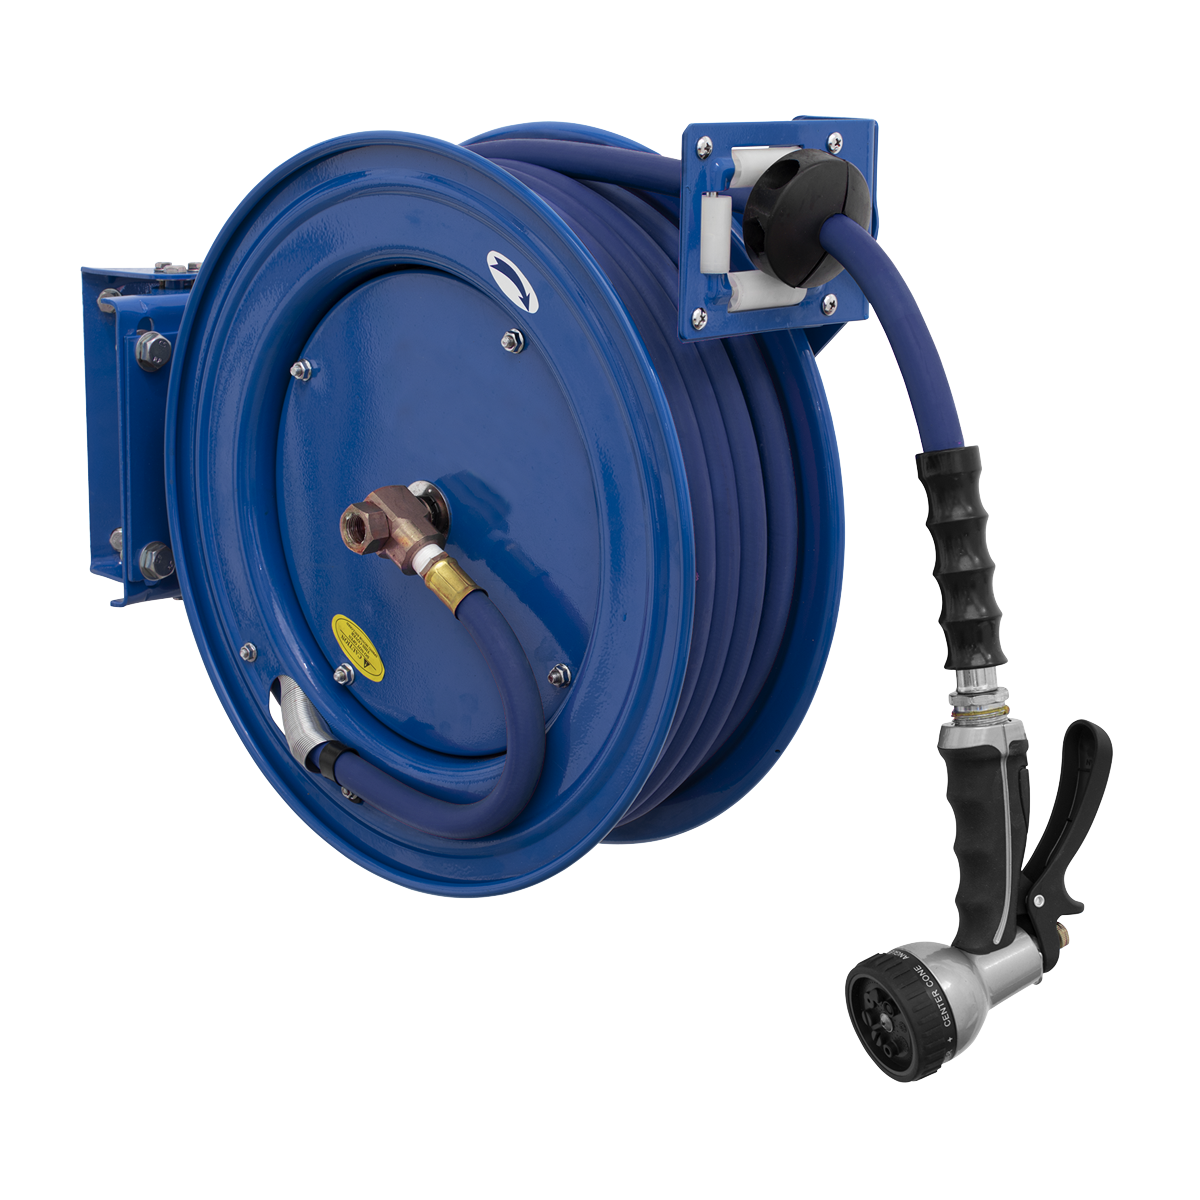 Sealey WHR1512 Heavy-Duty Retractable Water Hose Reel 15m ø13mm ID